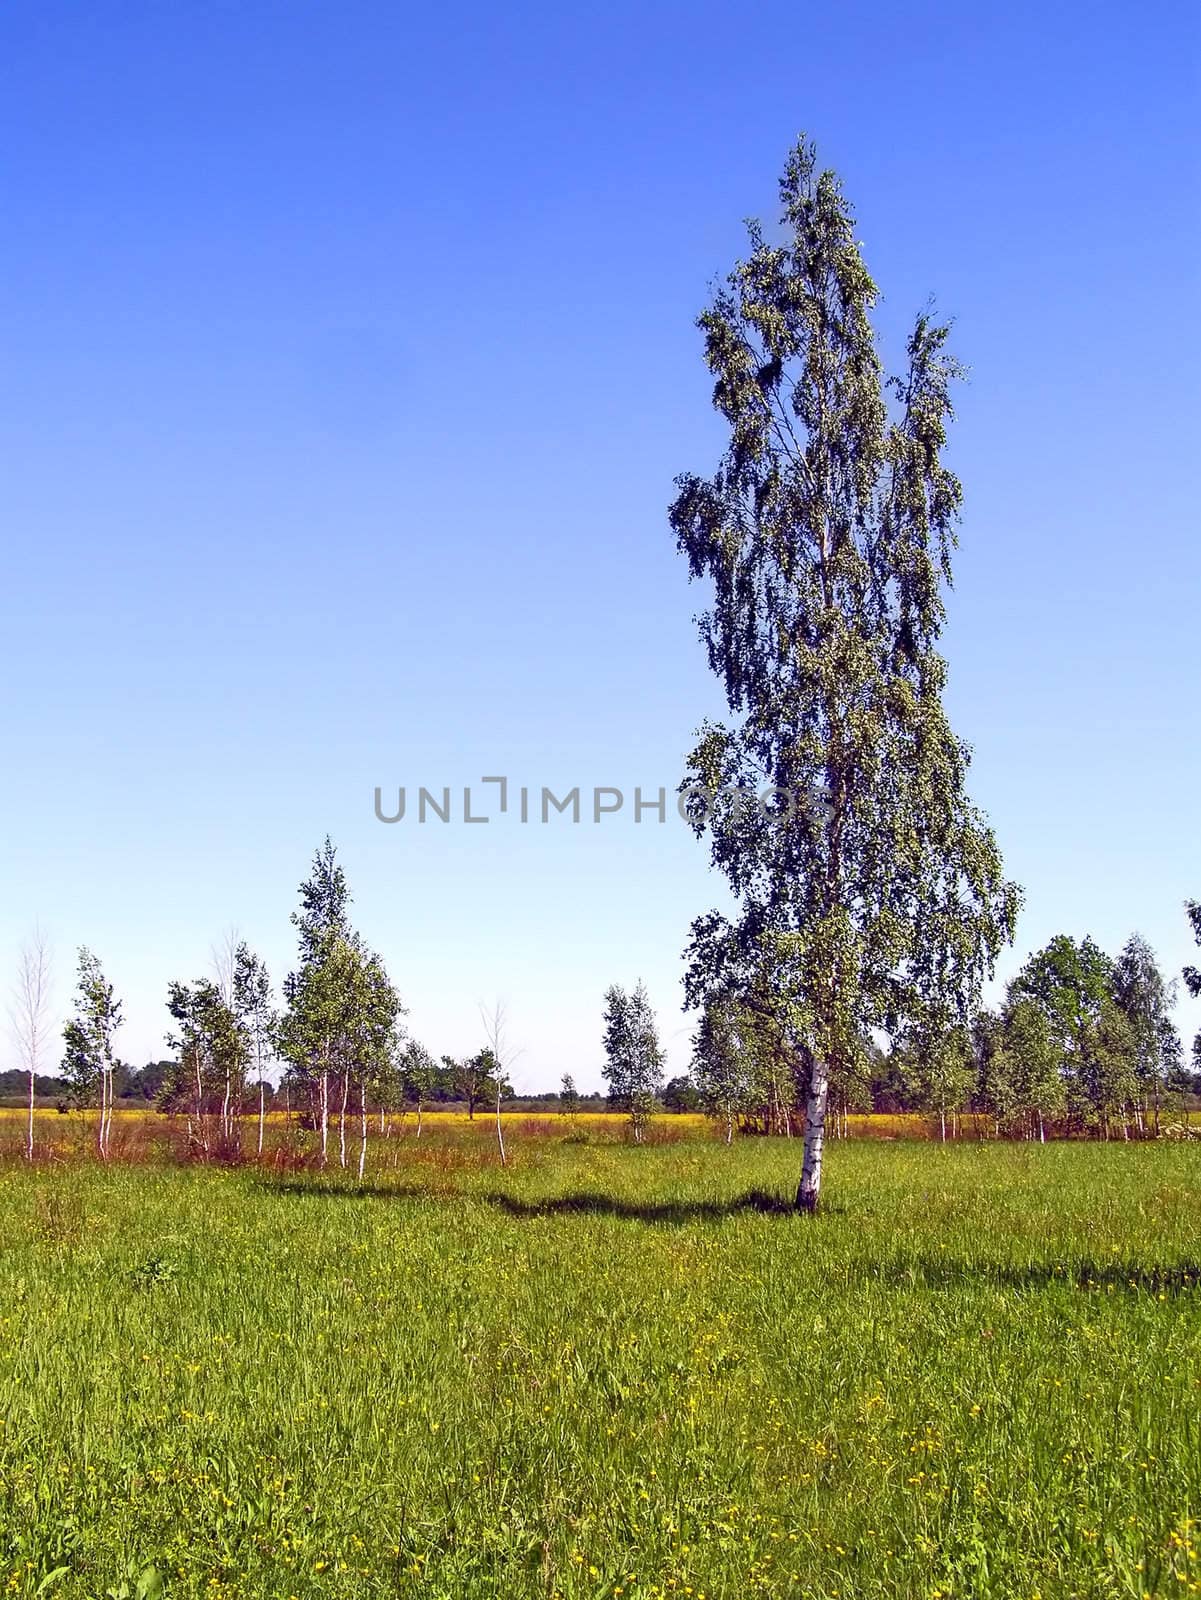 birches on green summer field by basel101658